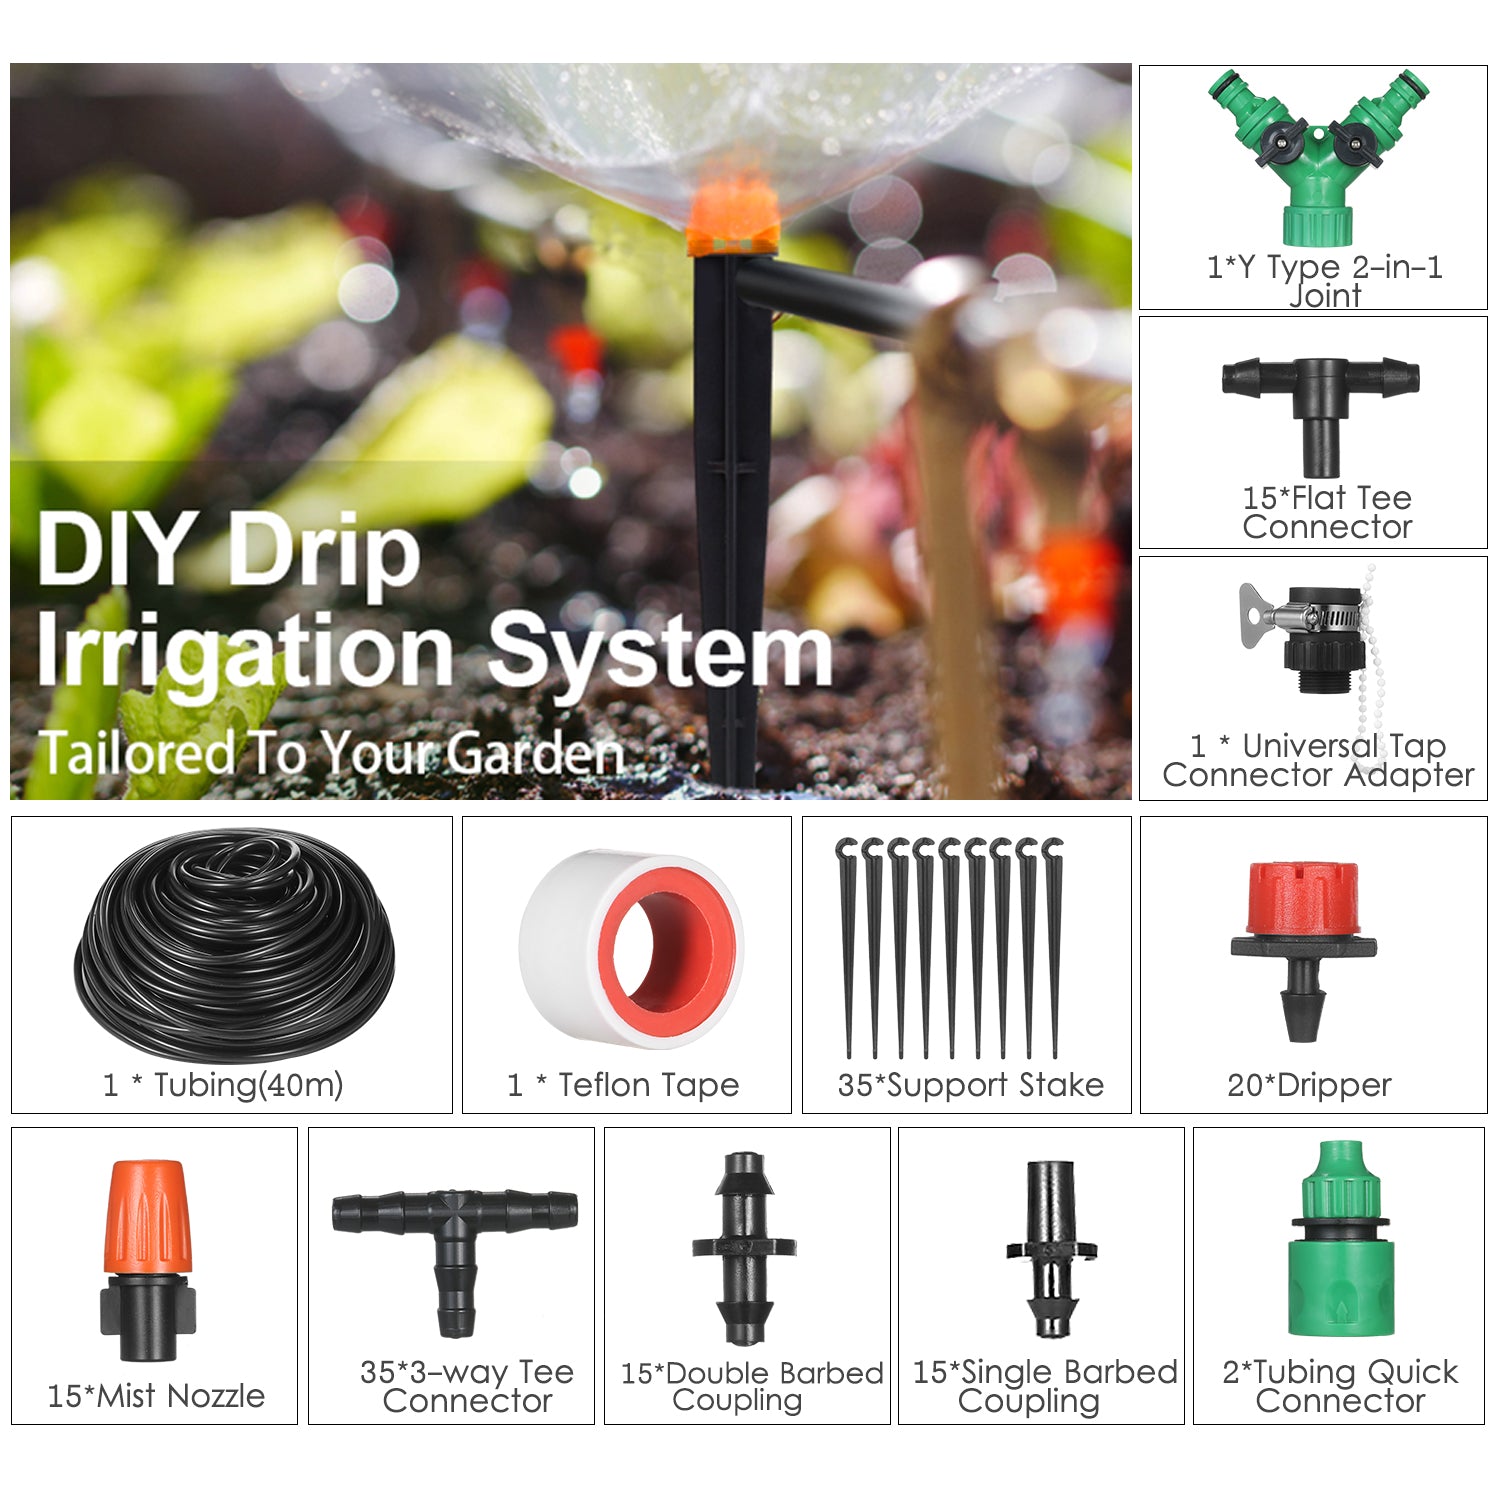 Plant Watering Drip Irrigation Kit Diy Watering System with Nozzles Misters Drippers 40 Meters Tubing for Garden Lawn Patio